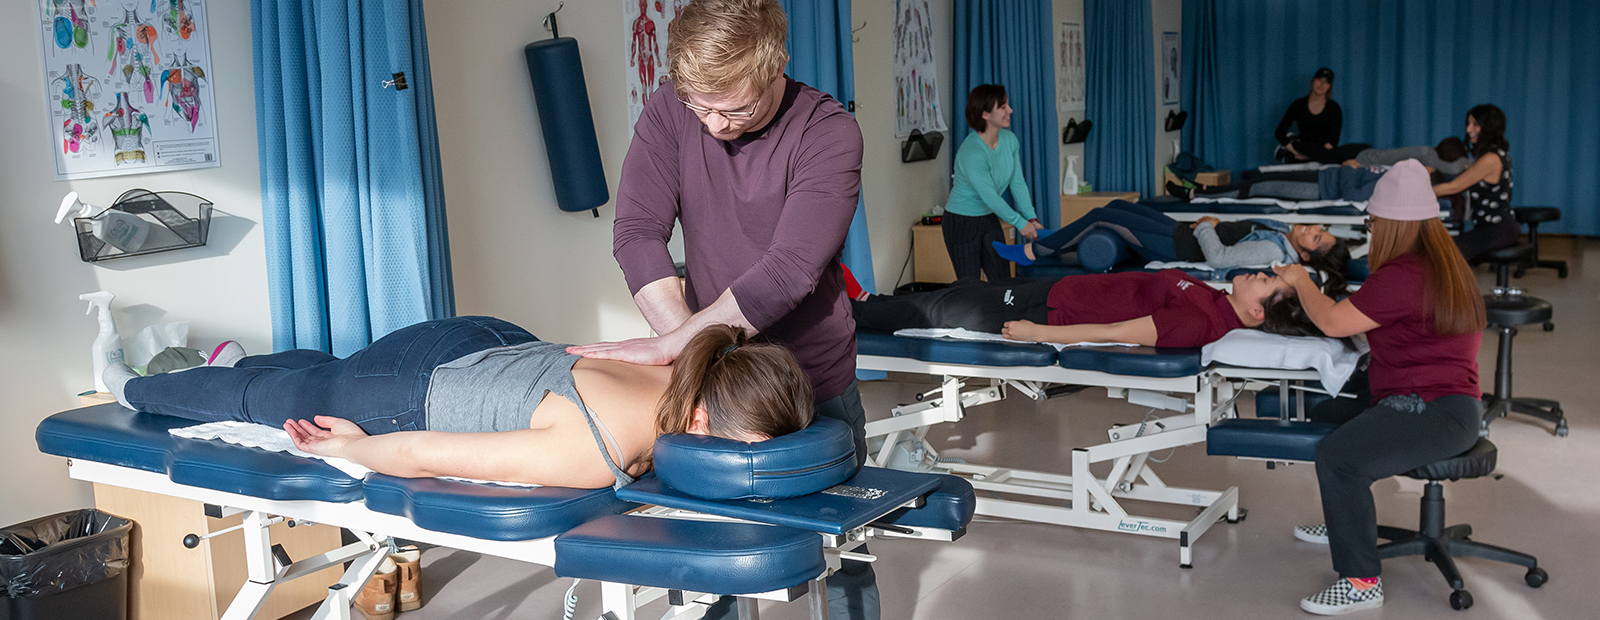 massage students practicing in class